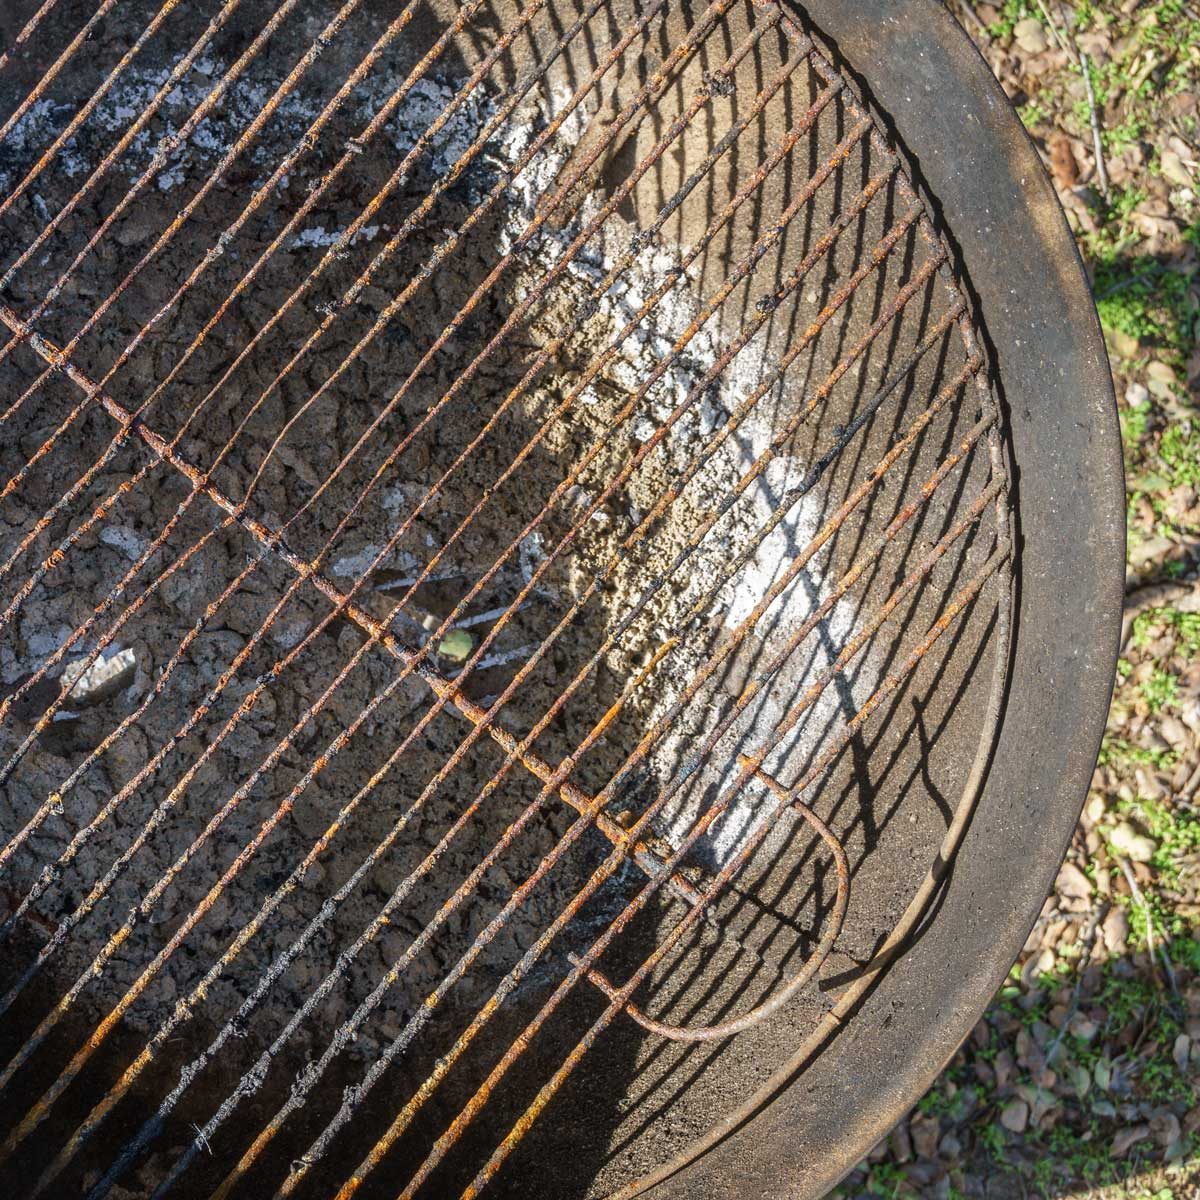 https://www.familyhandyman.com/wp-content/uploads/2020/02/charcoal-grill-GettyImages-917929322.jpg